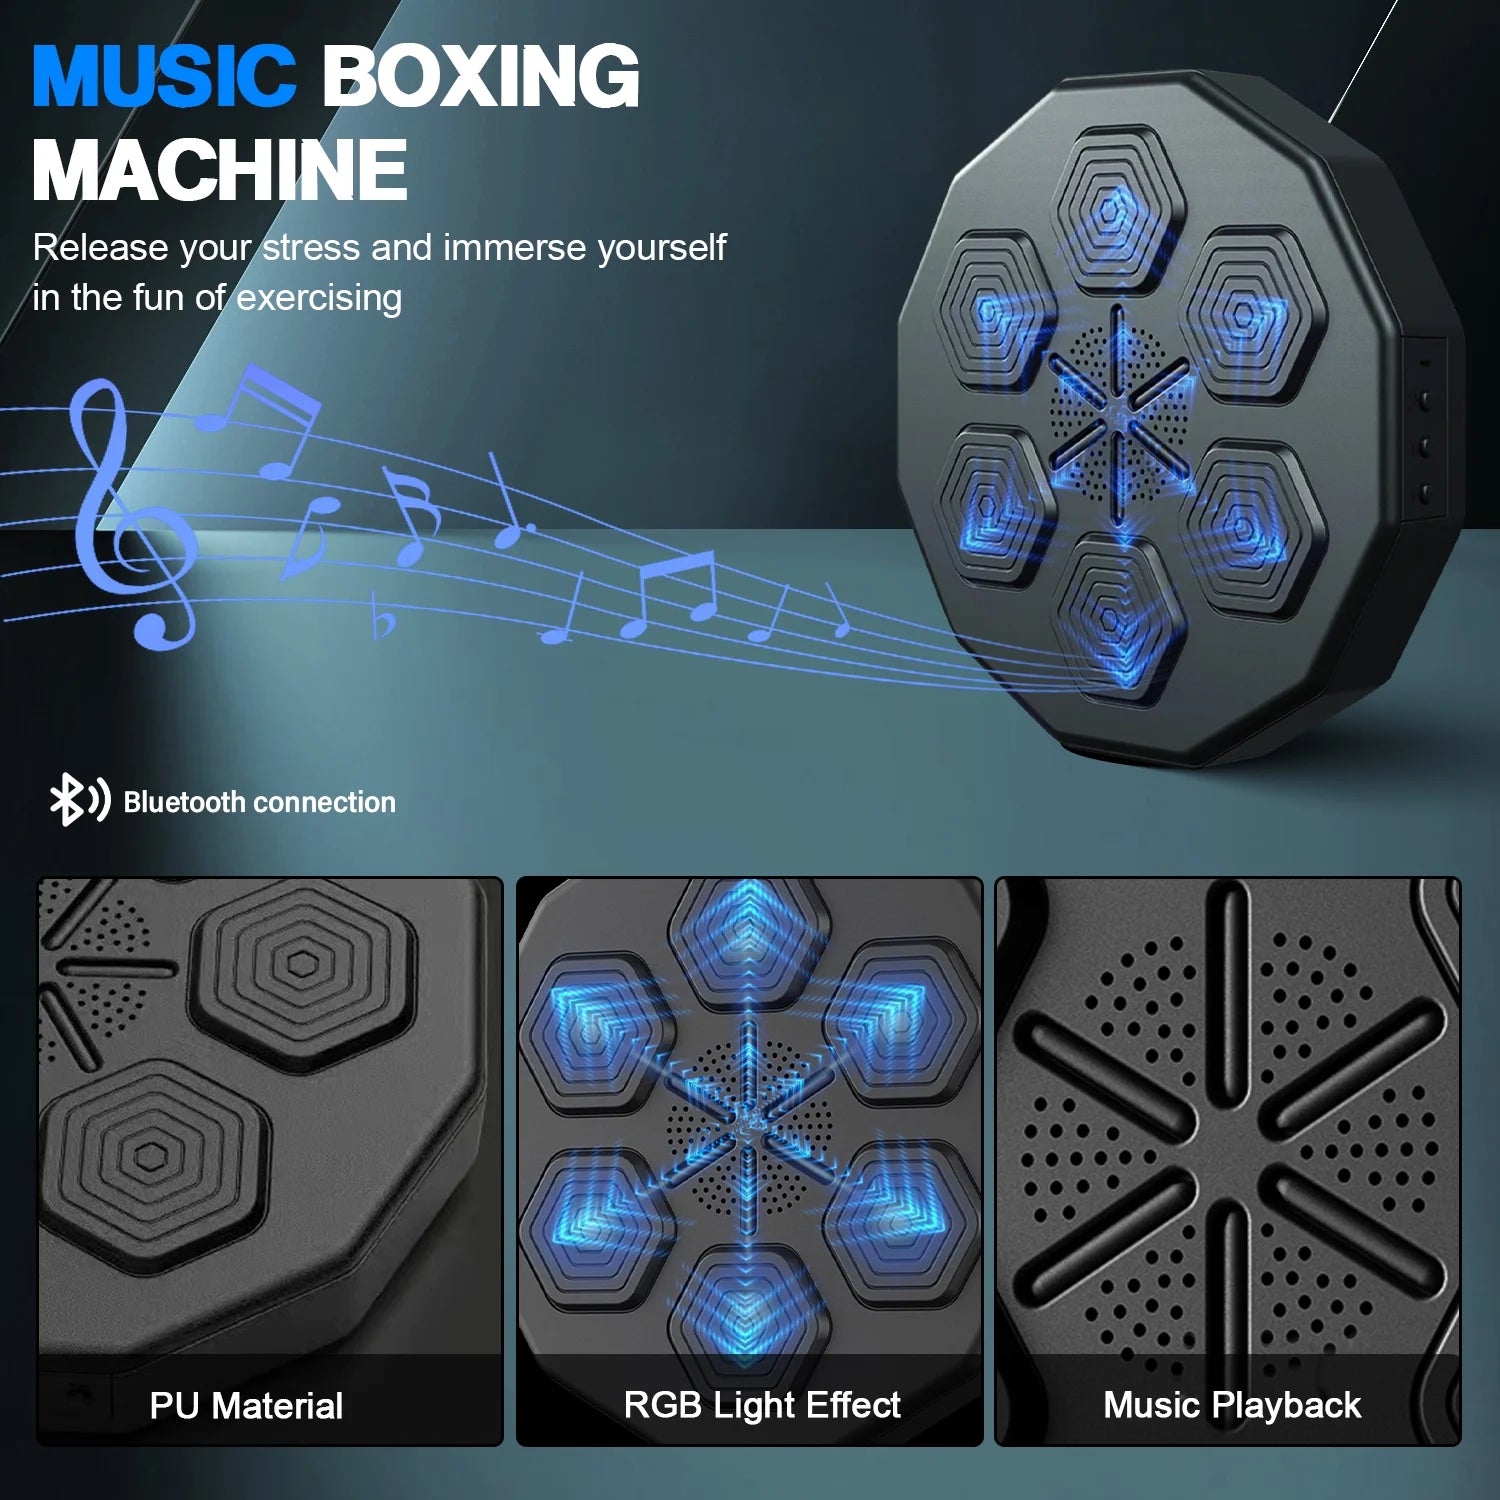 Music Boxing Machine, Smart Bluetooth Connection Boxing Equipment, Fight Reaction Training Boxing Pad, Release Pressure Wall Mounted Punching Equipment with Boxing Gloves